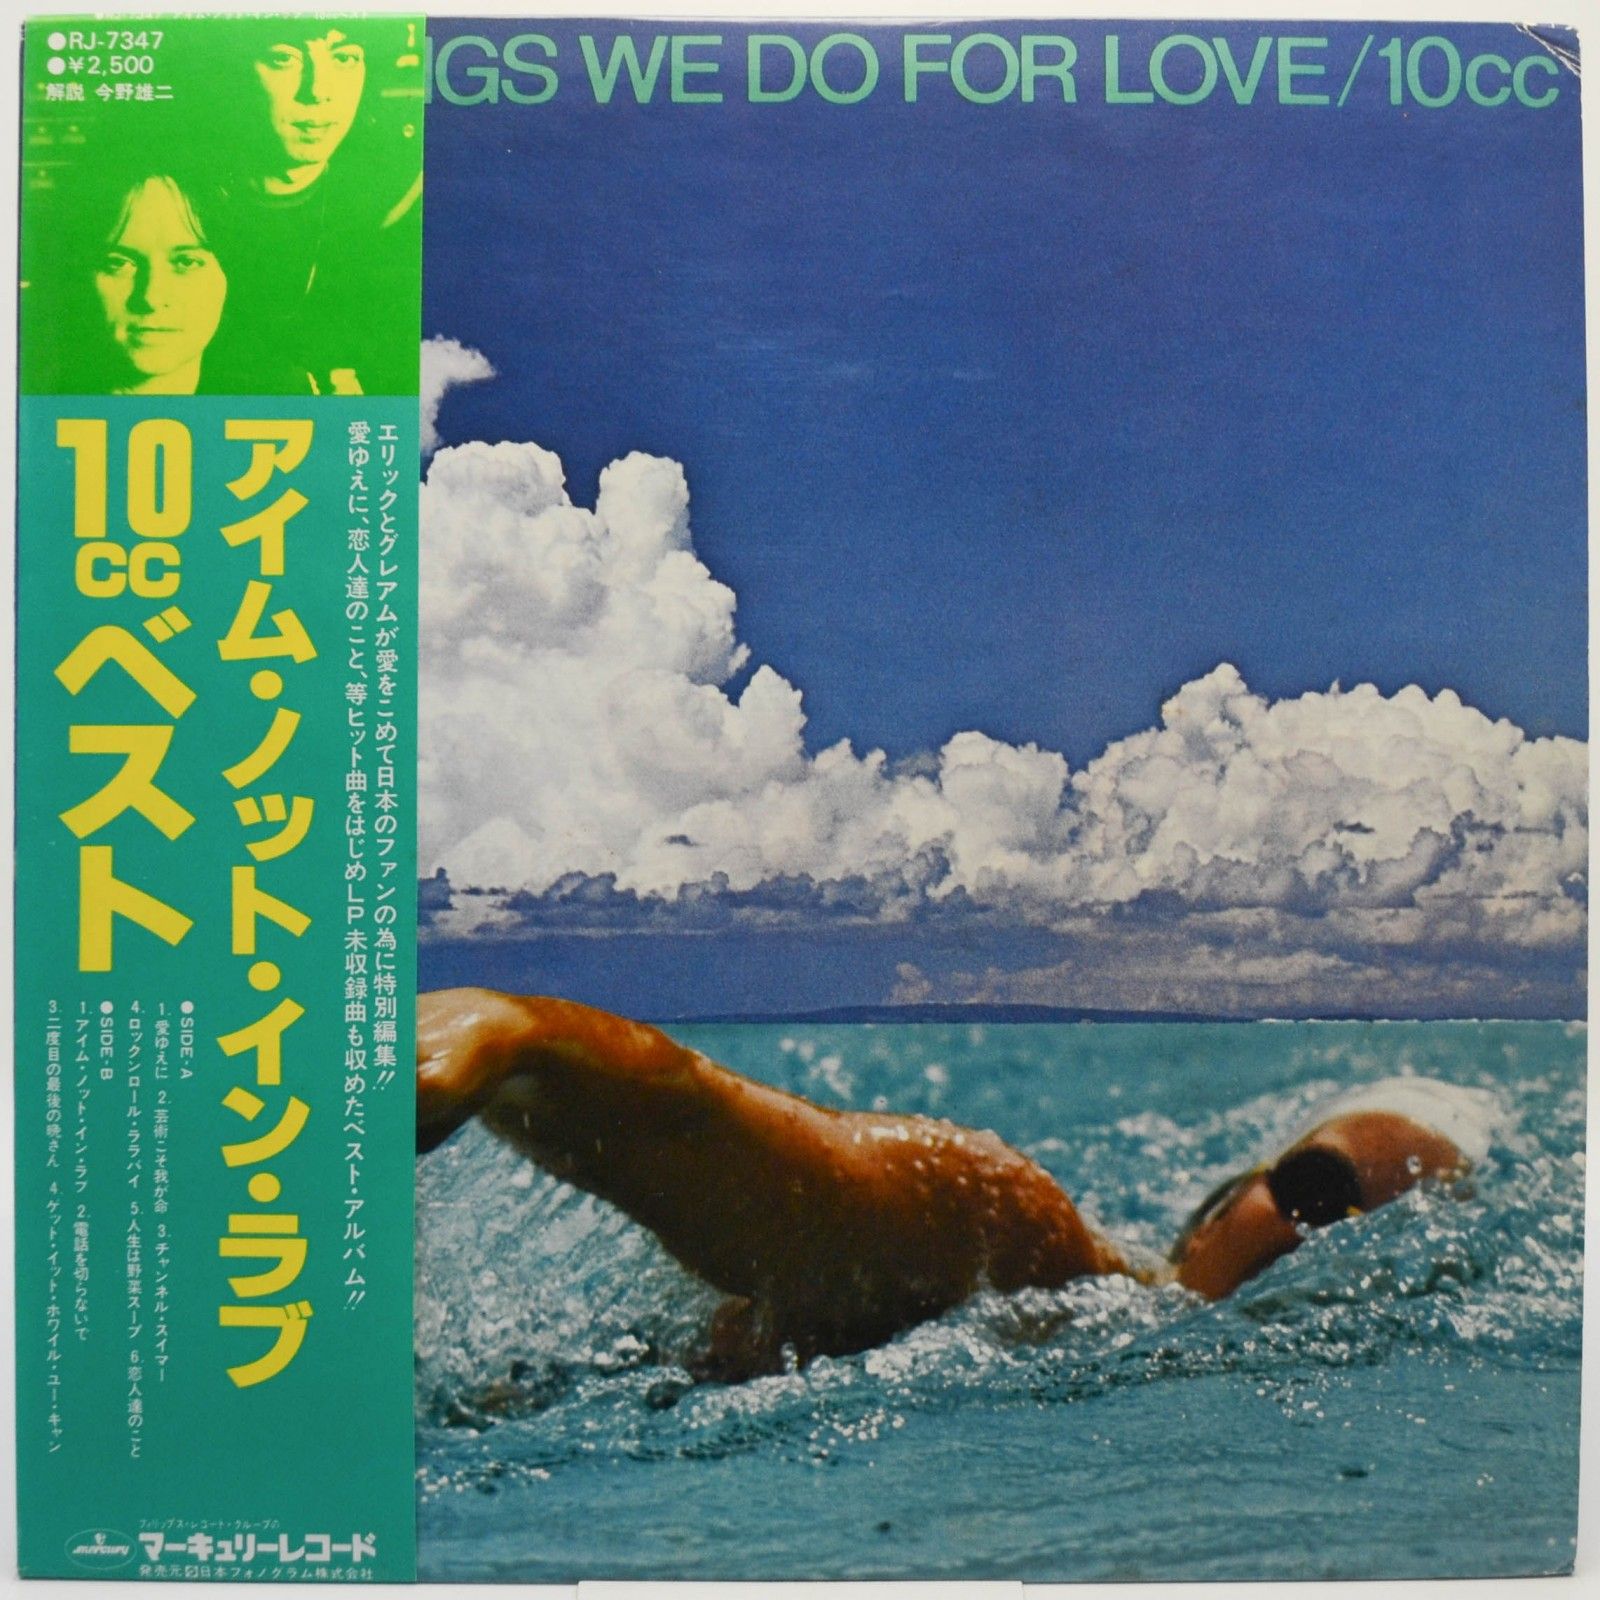 10cc — The Songs We Do For Love, 1978